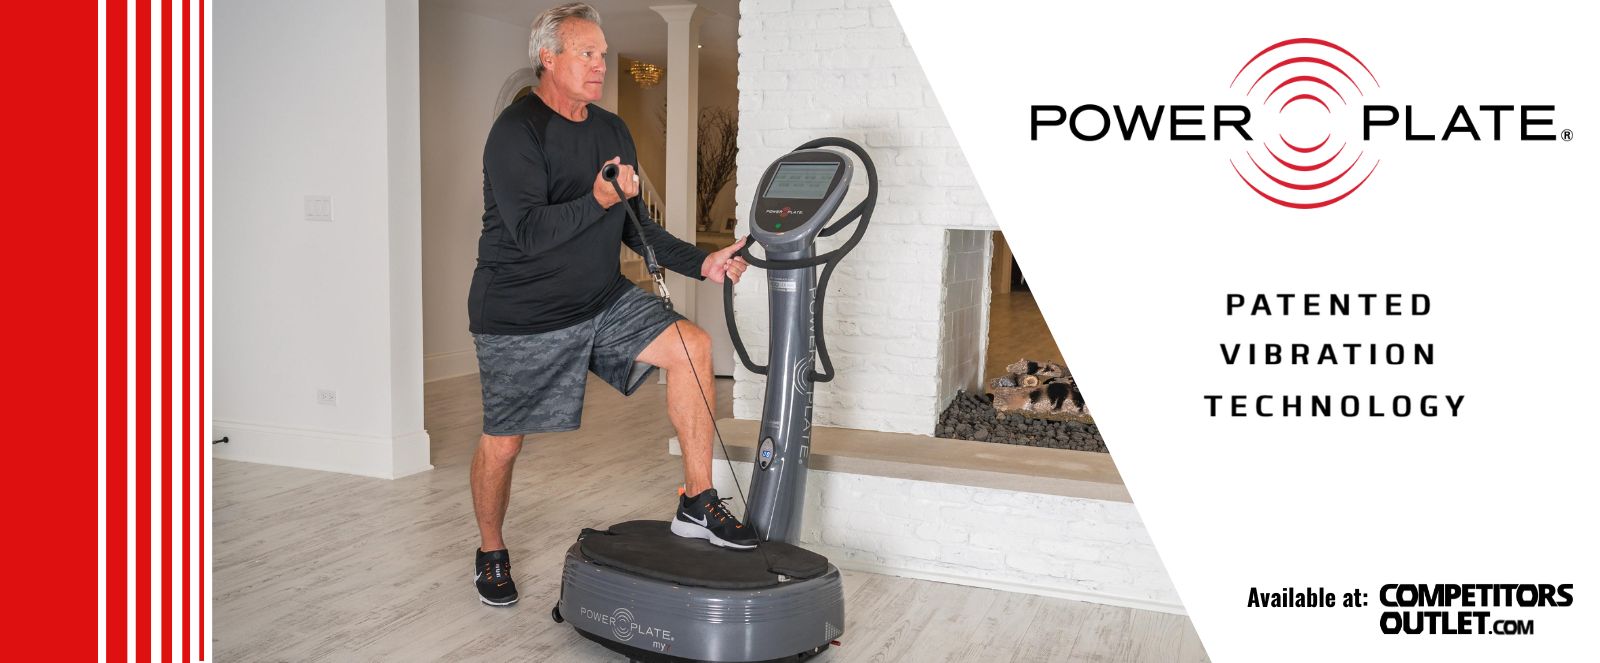 Power Plate for Stronger Bones and Healthier Joints